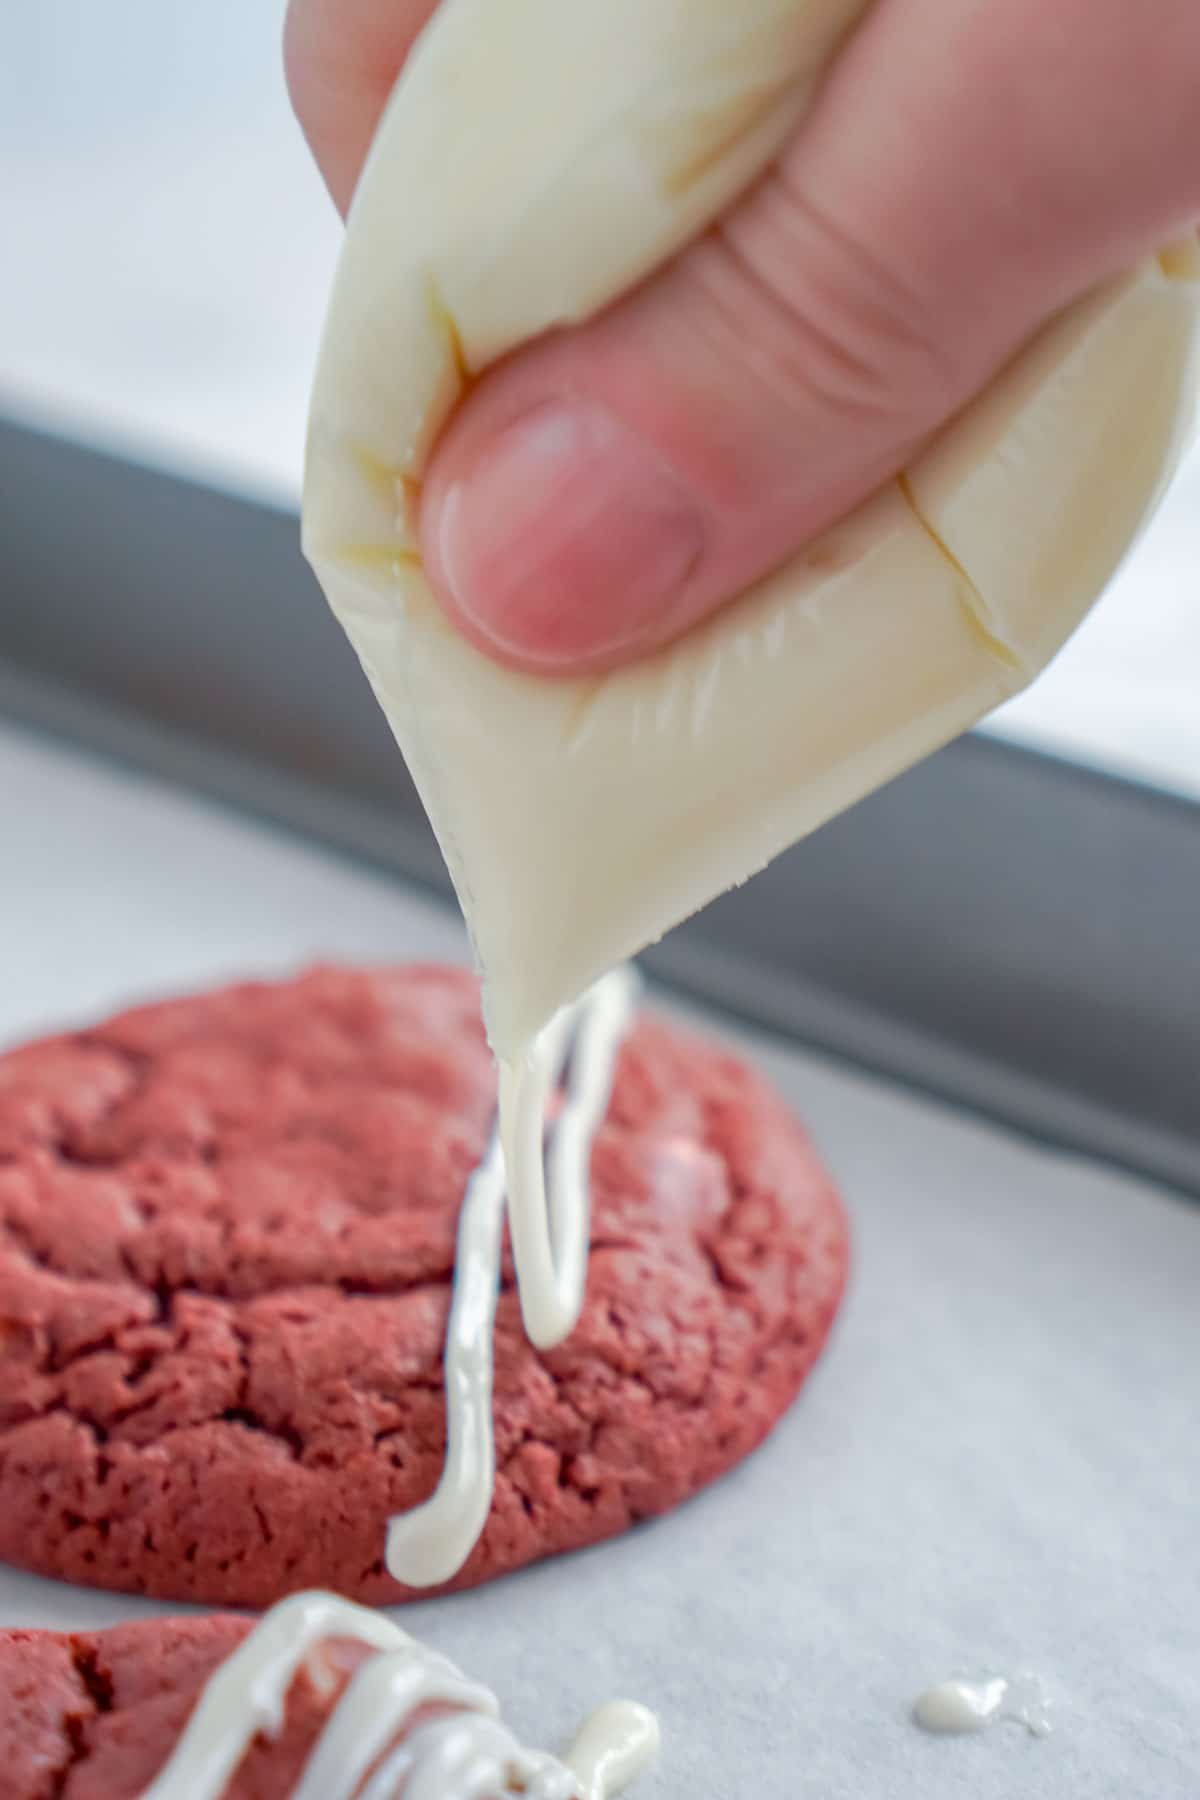 Piping icing over red velvet cookies